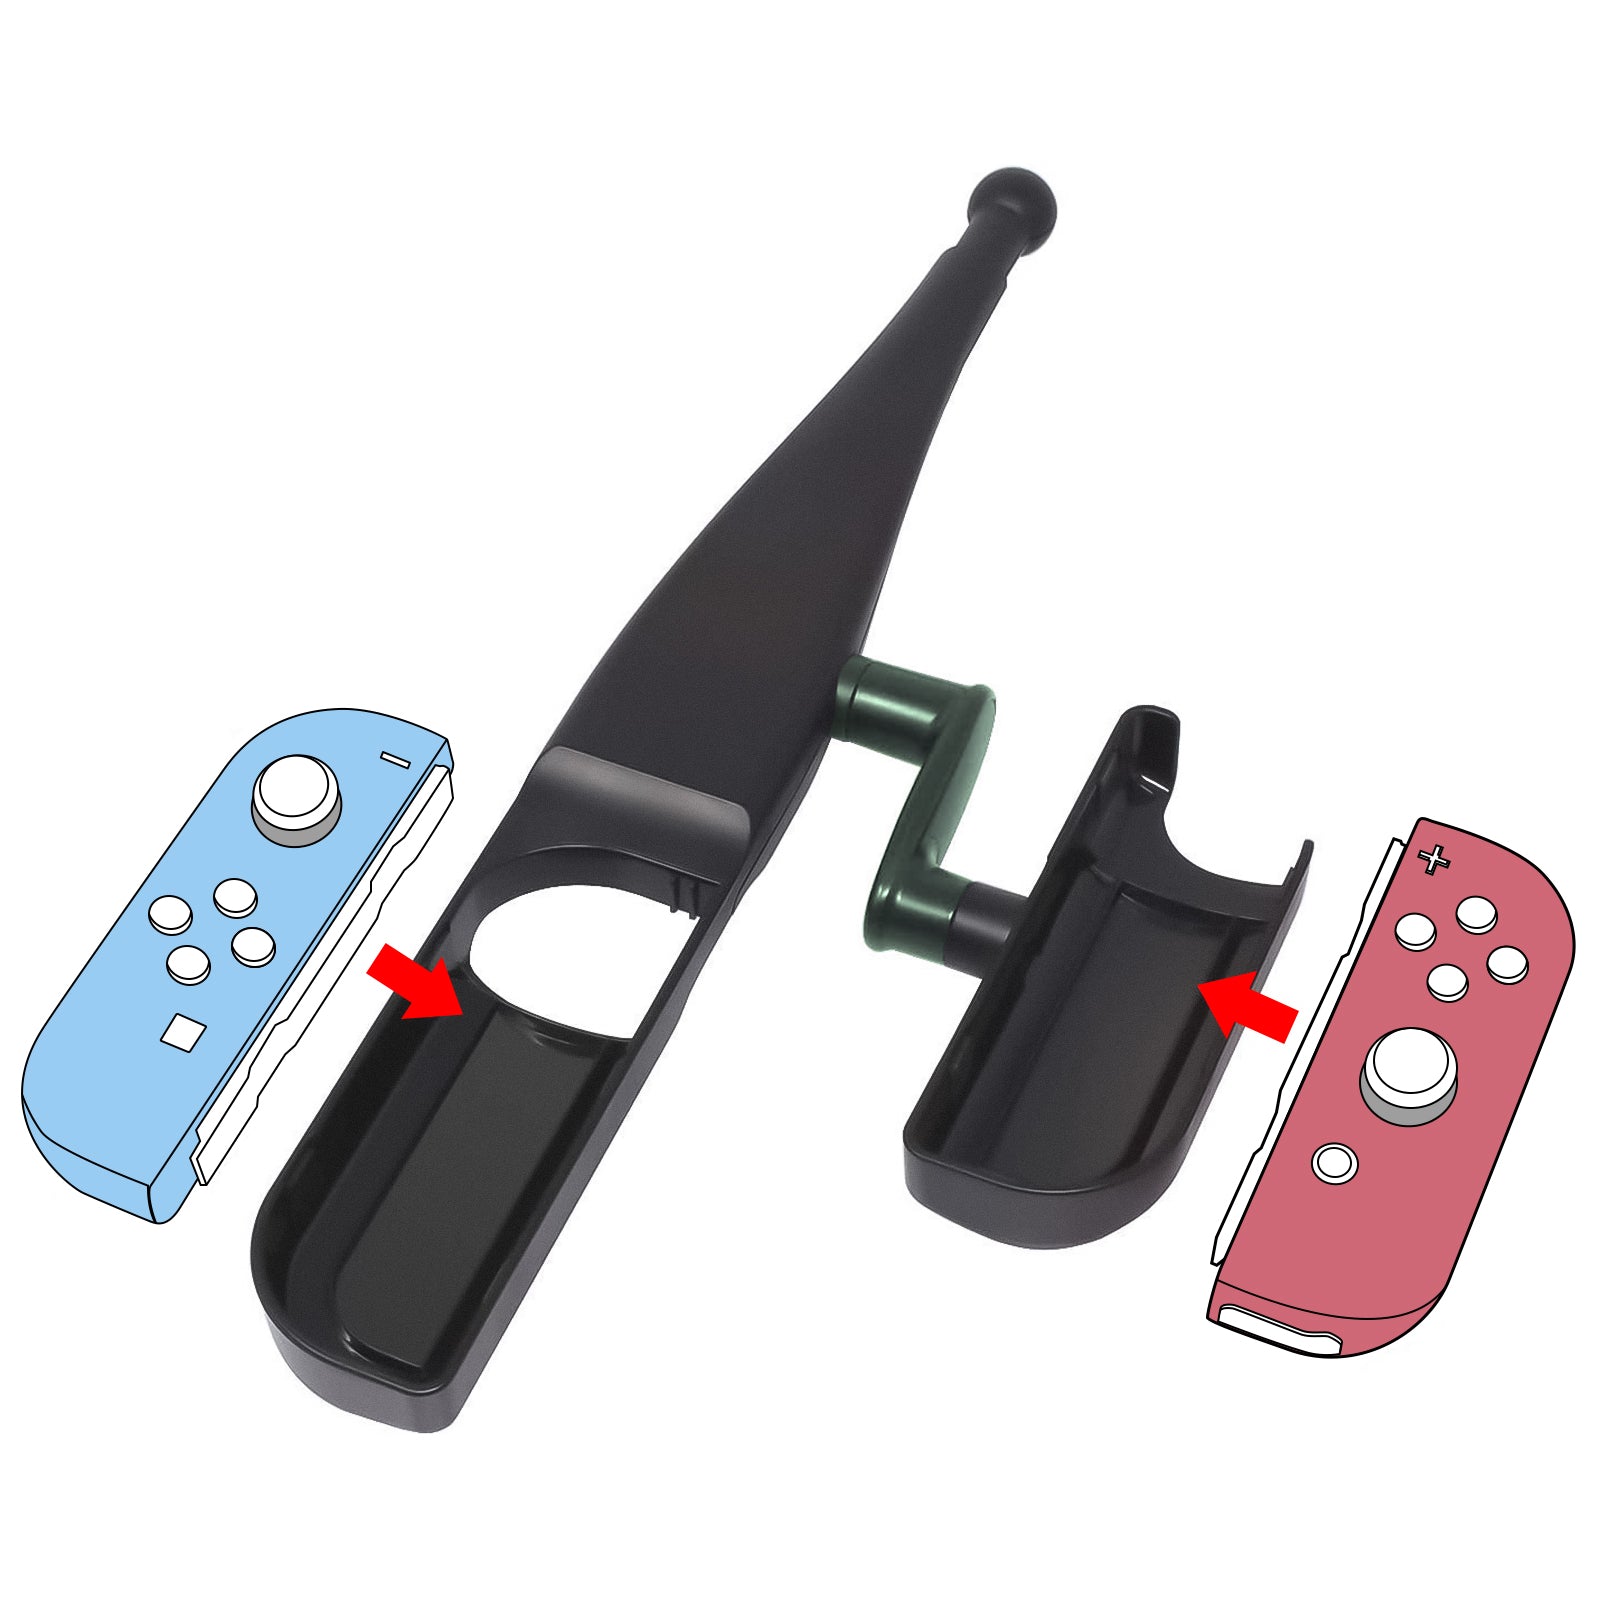 Geekria Fishing Rod Compatible with Switch Joy-Con Game Kit Compatible with Nintendo Switch/OLED Accessories Bass Pro Shops - The Strike Championship